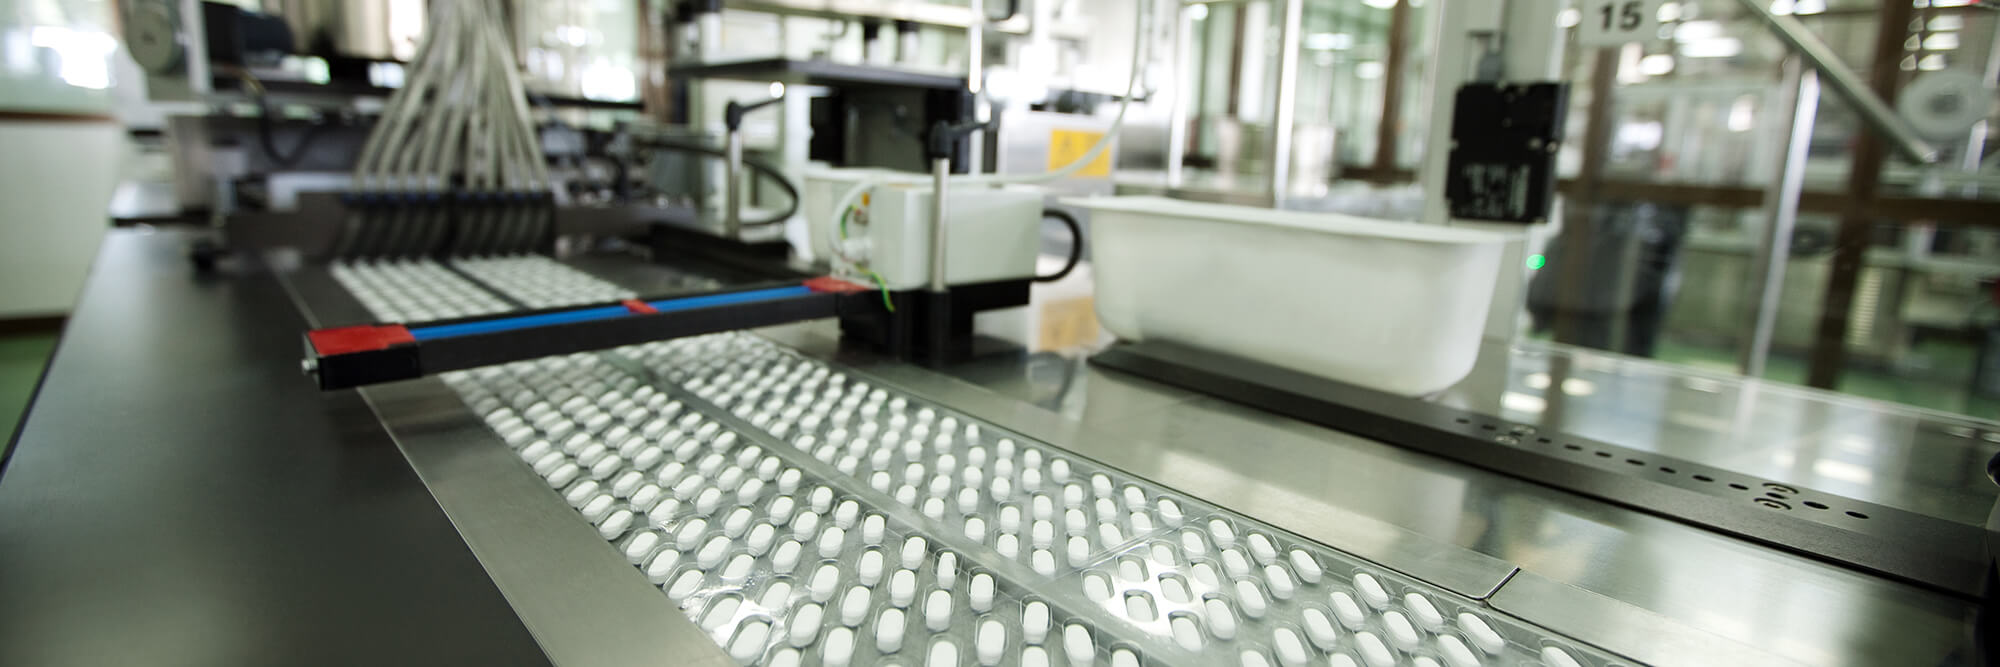 All OTCPharm products are manufactured in strict compliance with the corporate Quality Management System